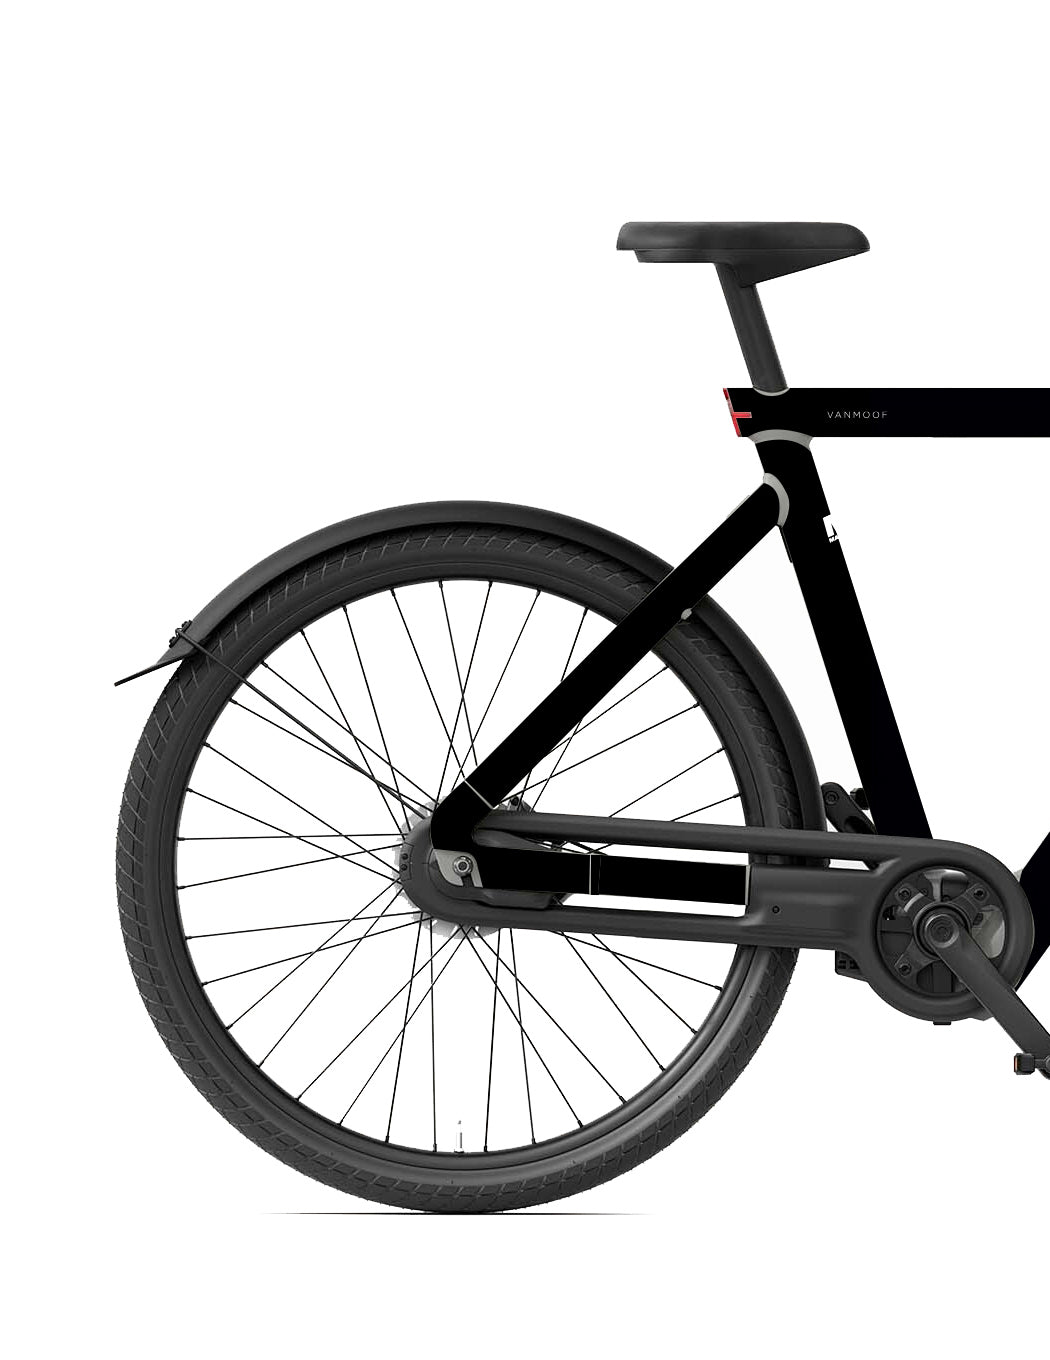 HOT ROD PROTECT KIT FOR VANMOOF S5